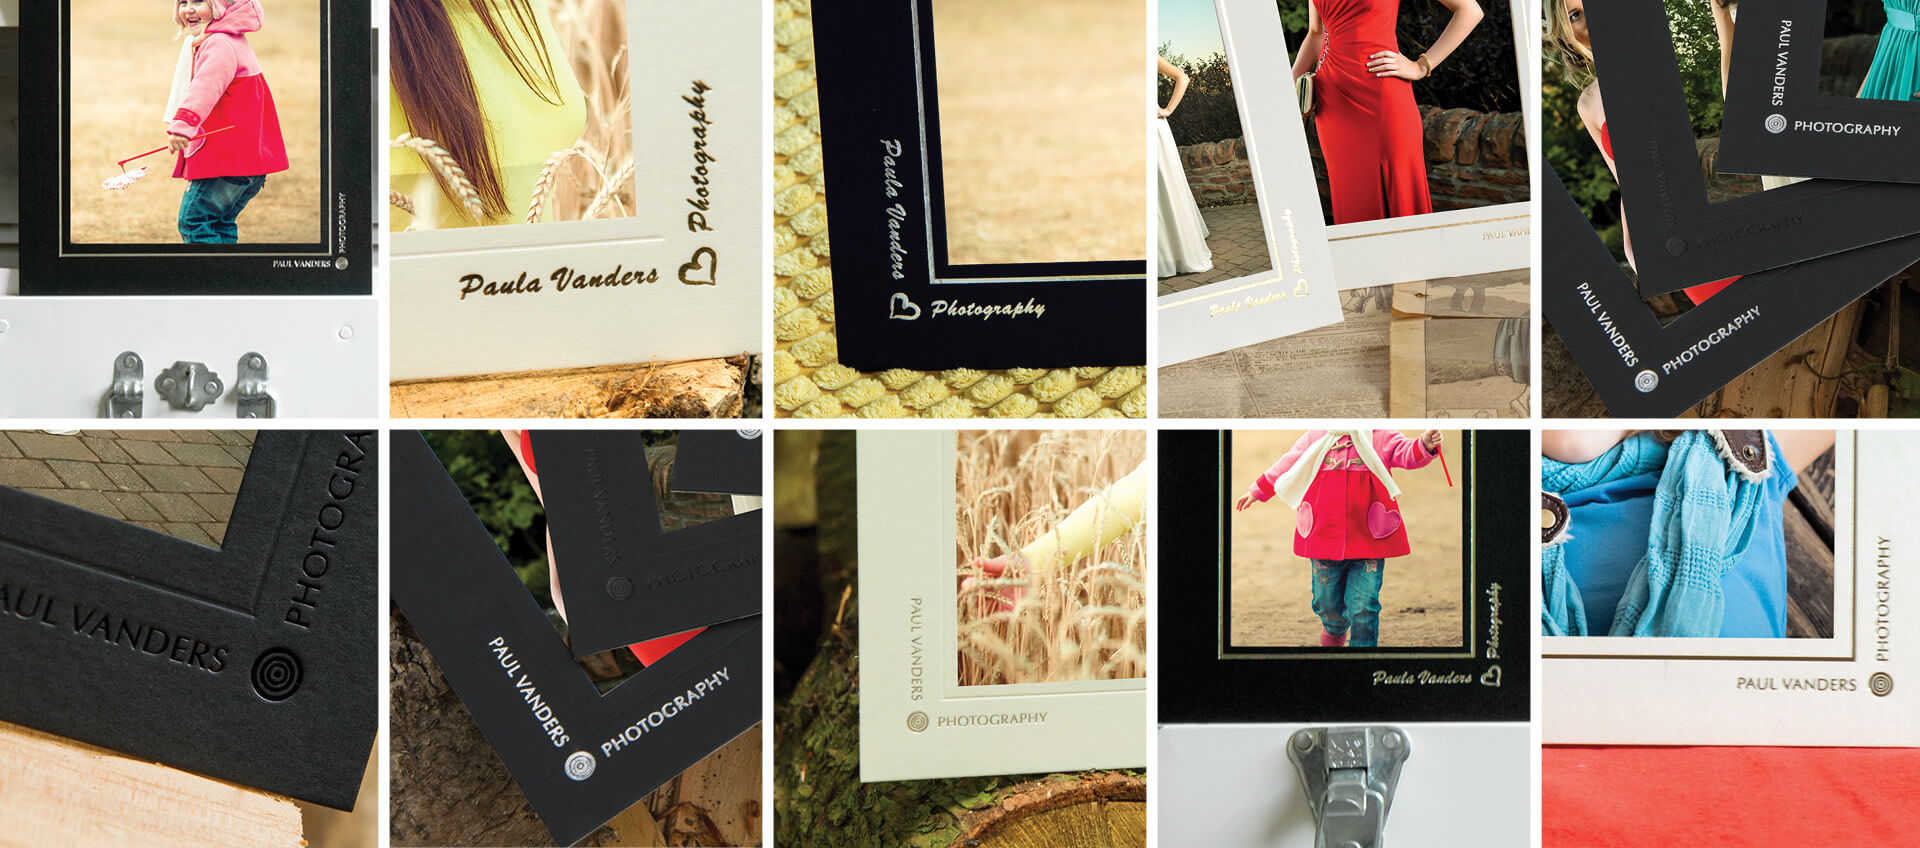 Brand your mounts and folders to promote your photography business